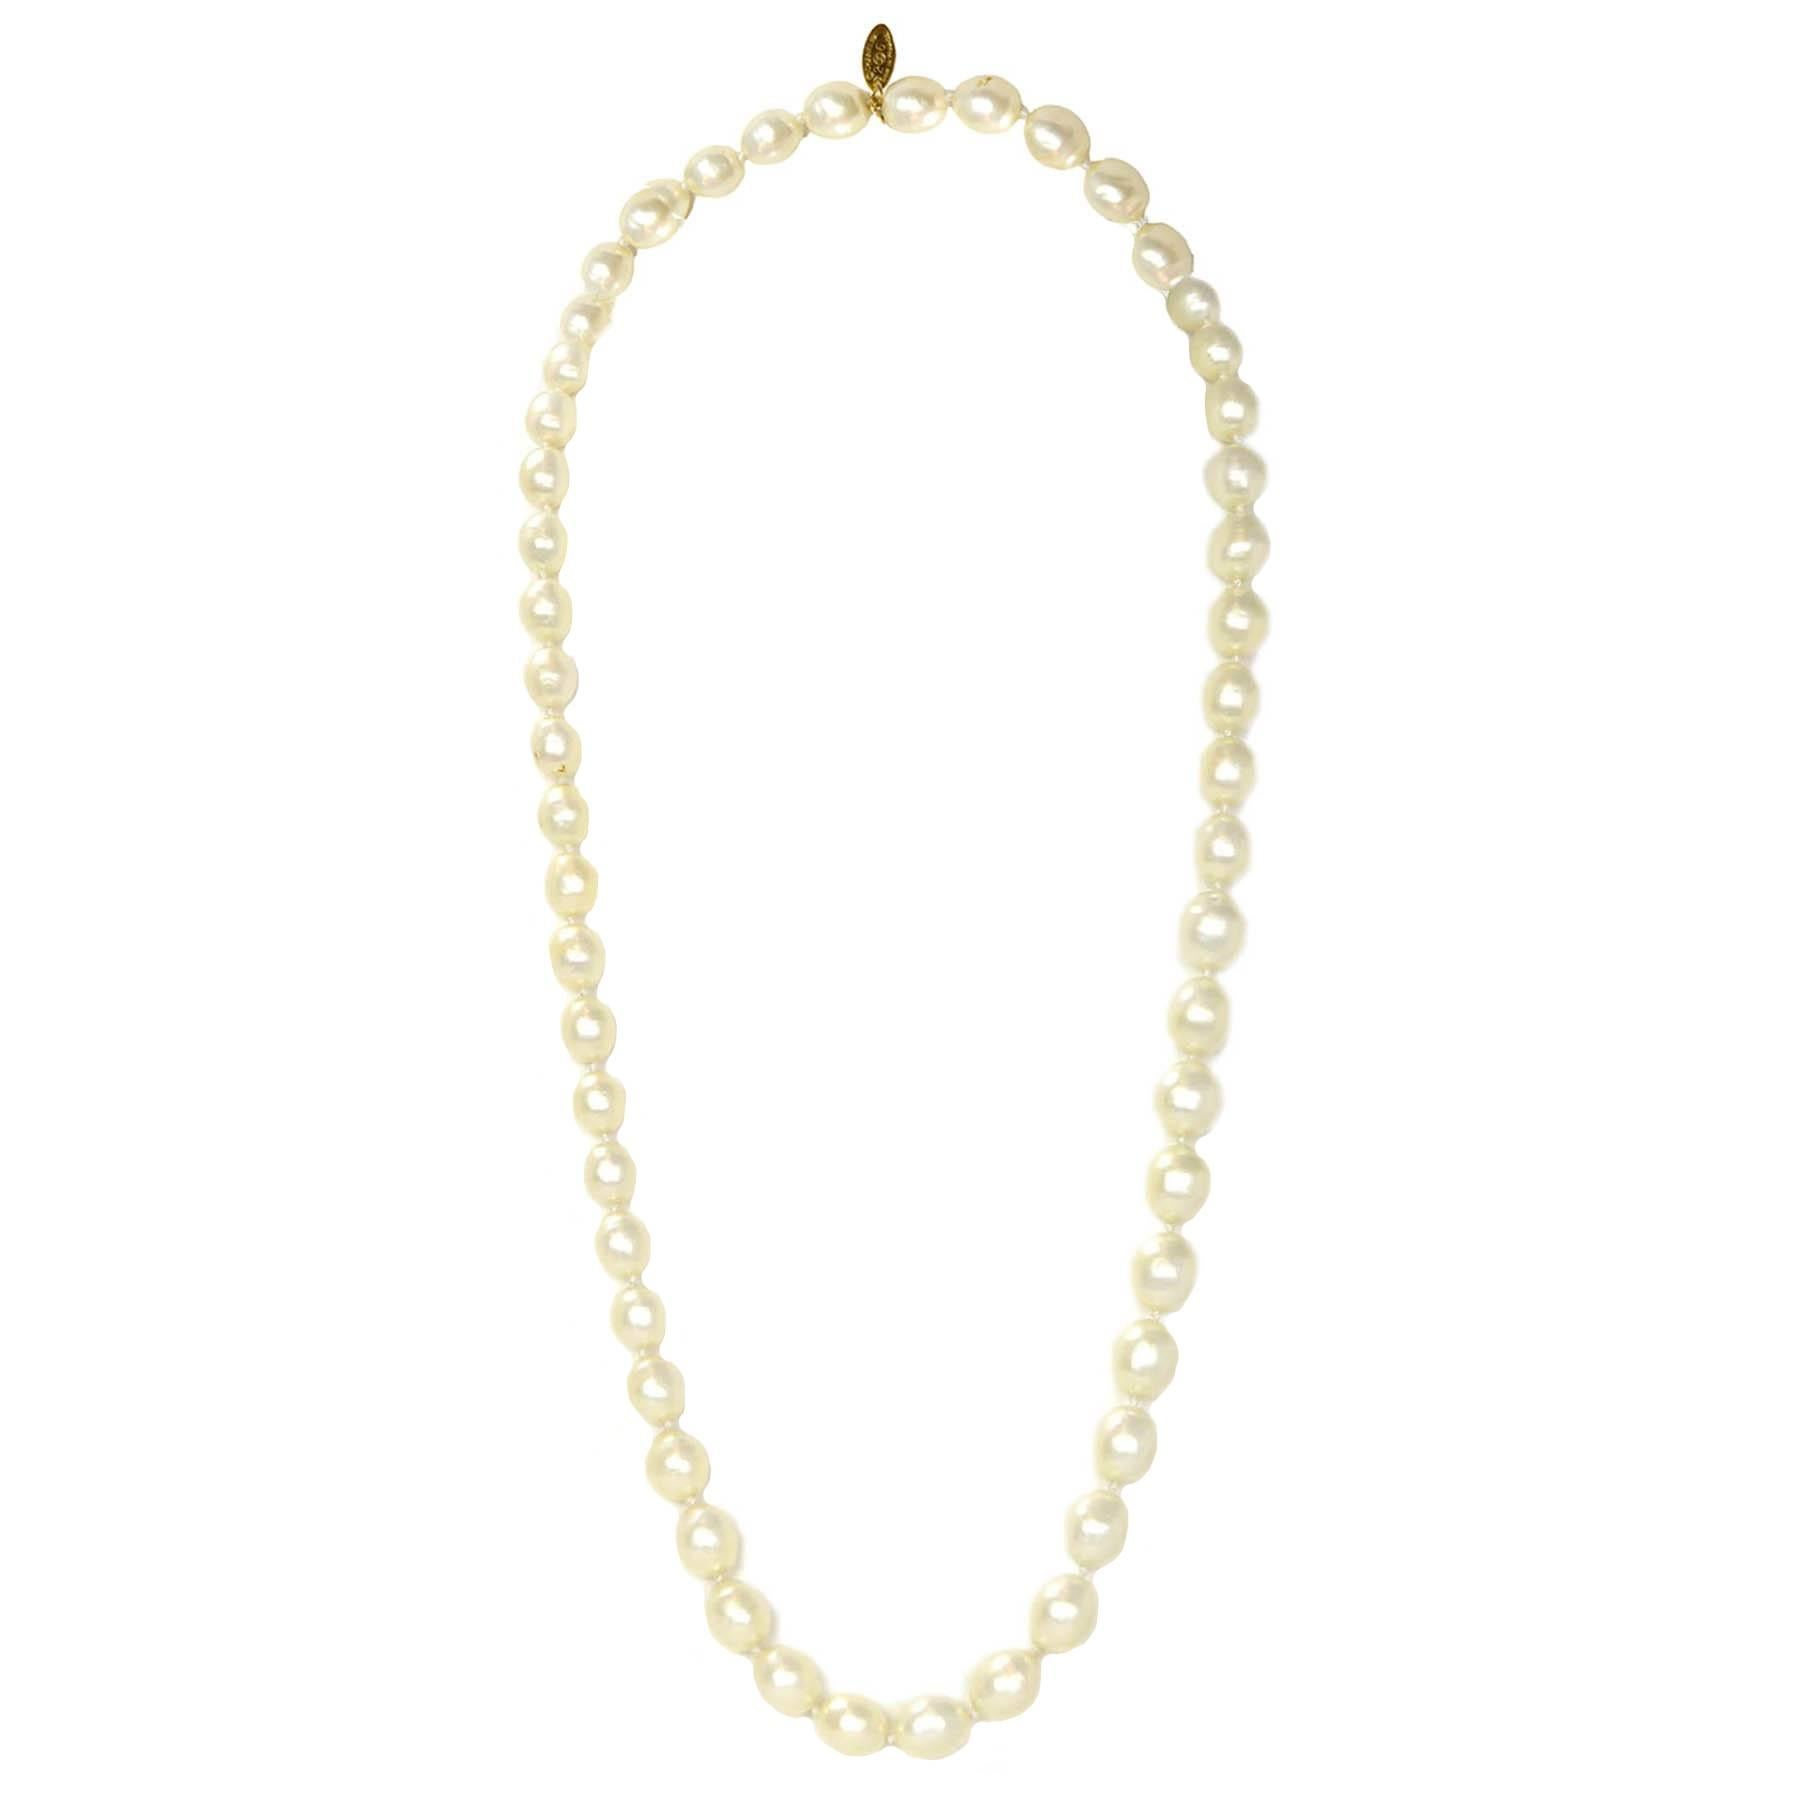 CHANEL Vintage '87 Graduated Pearls Single Strand Necklace